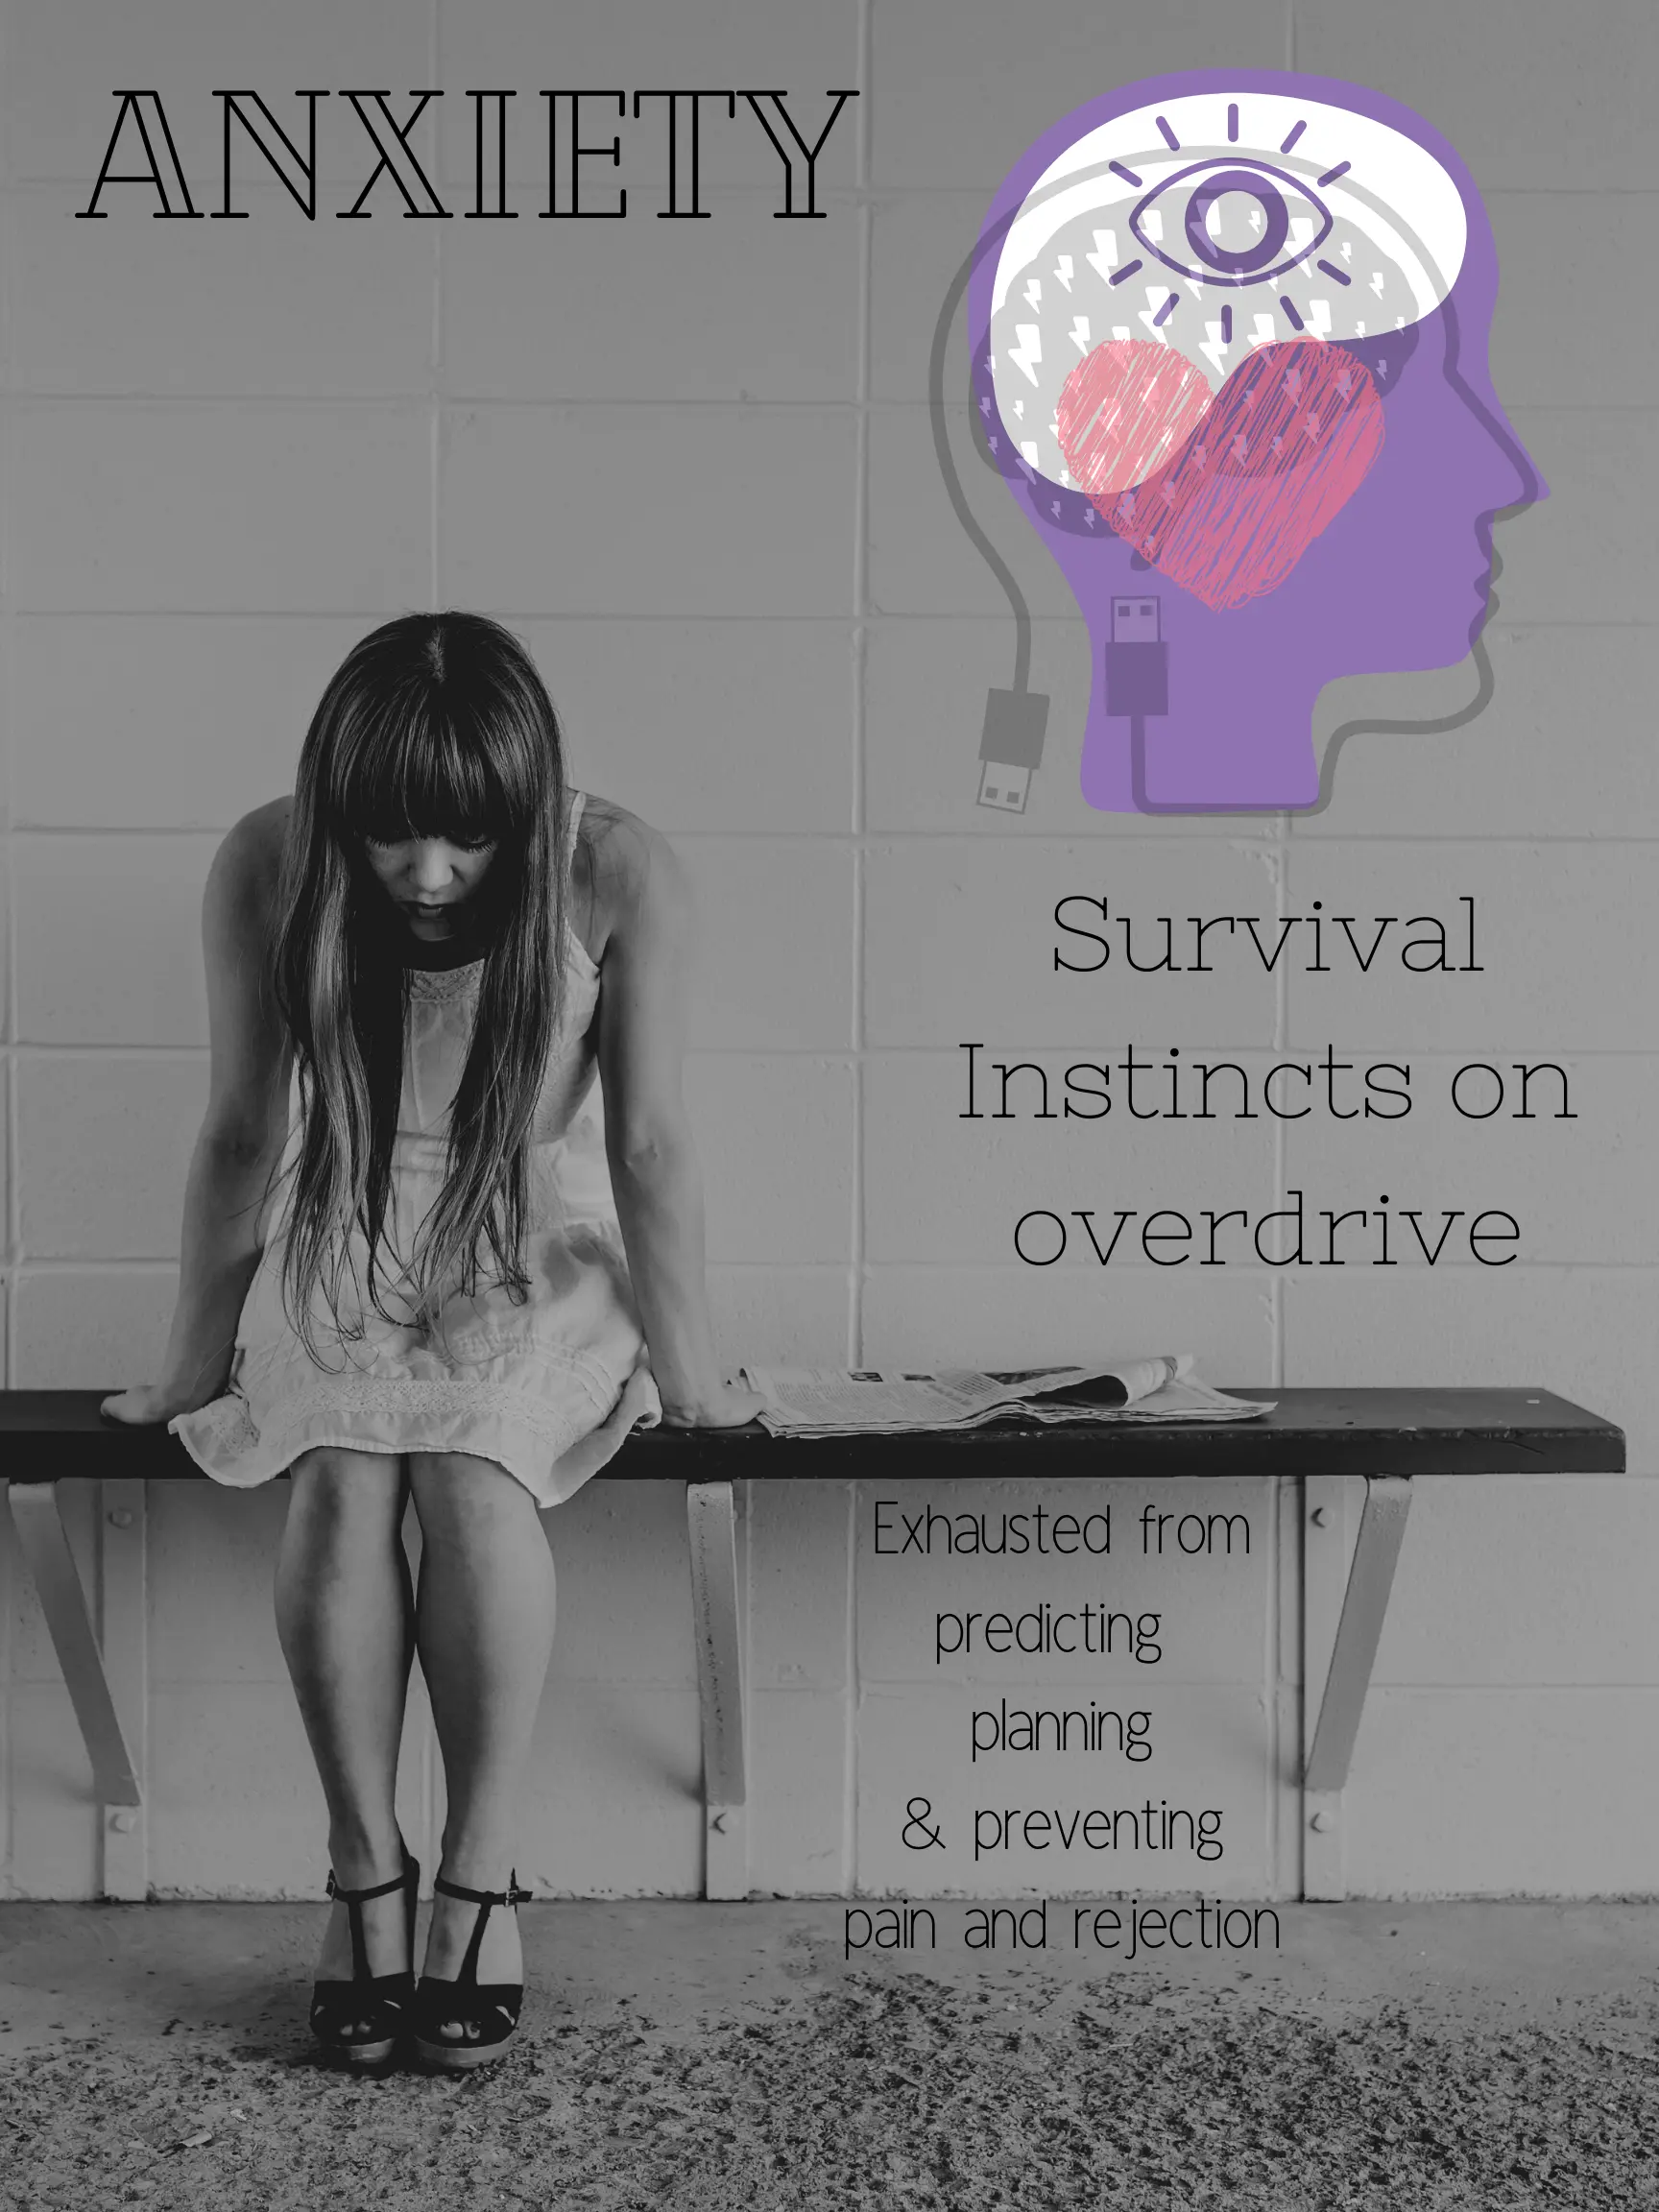 Anxiety means survival instincts on overdrive.